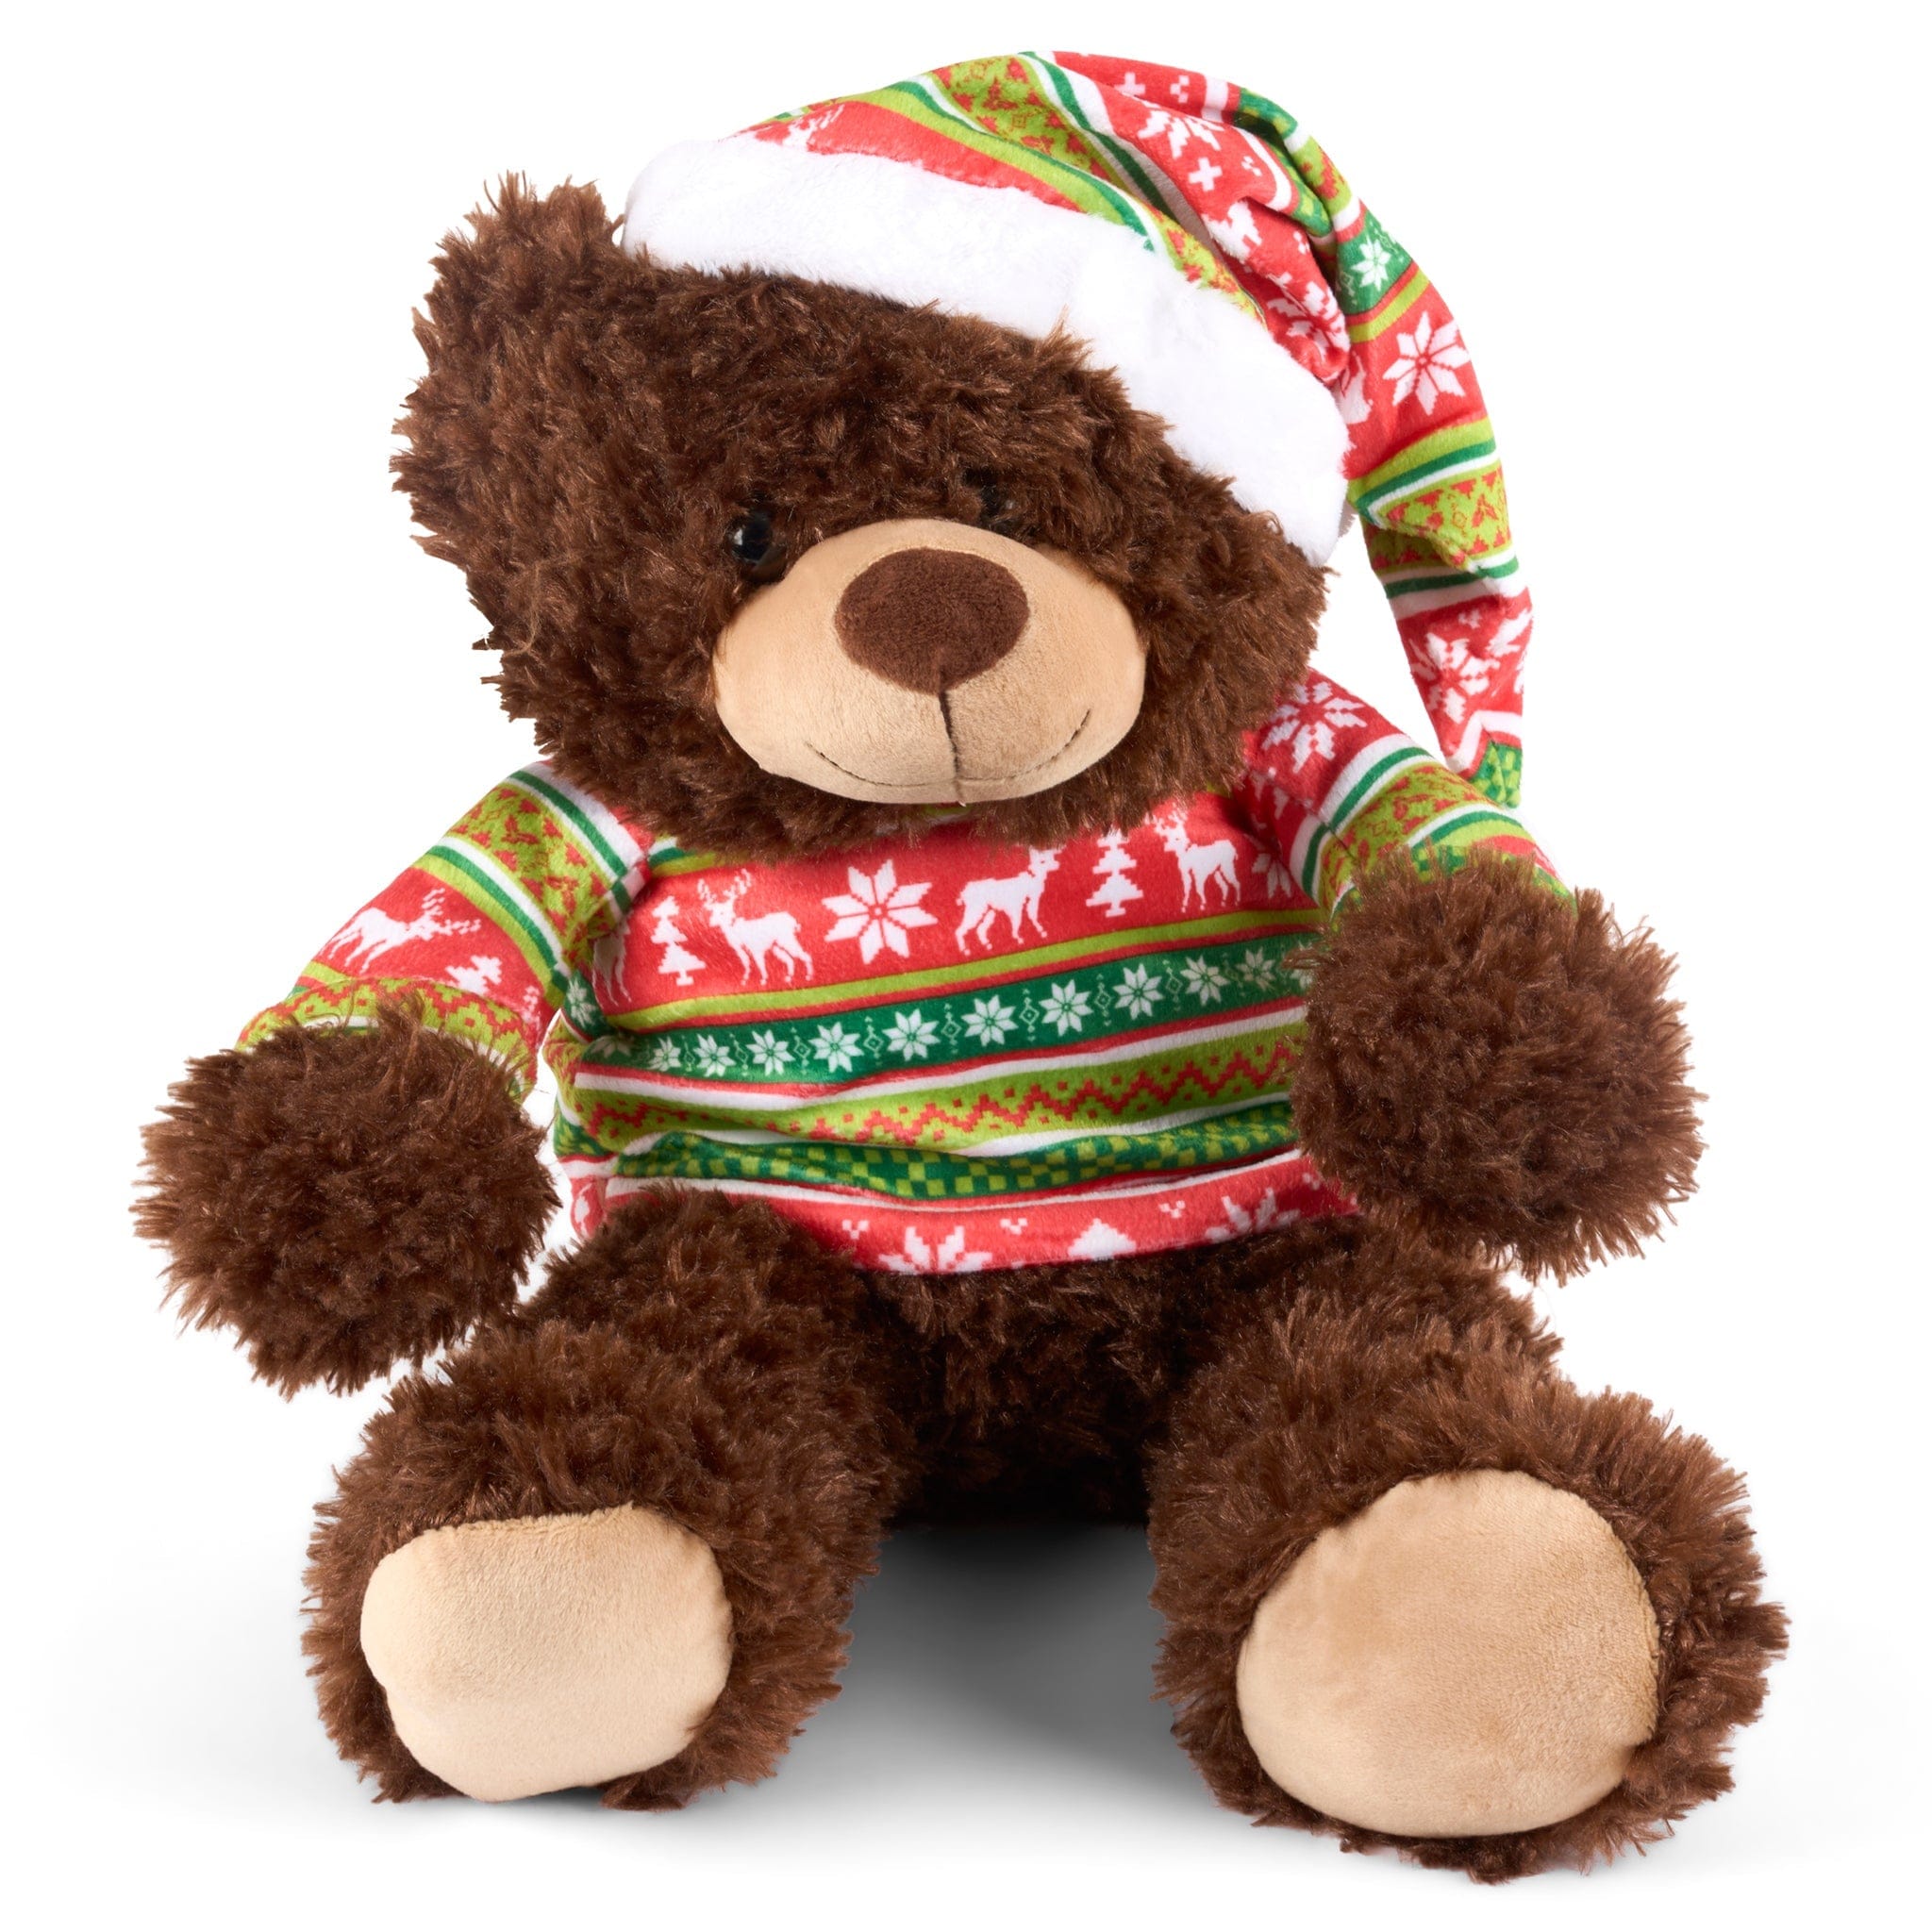 Fluffy Christmas Plush Bear Toy With Christmas Jumper & Hat -  48cm Brown 5051516802850 only5pounds-com